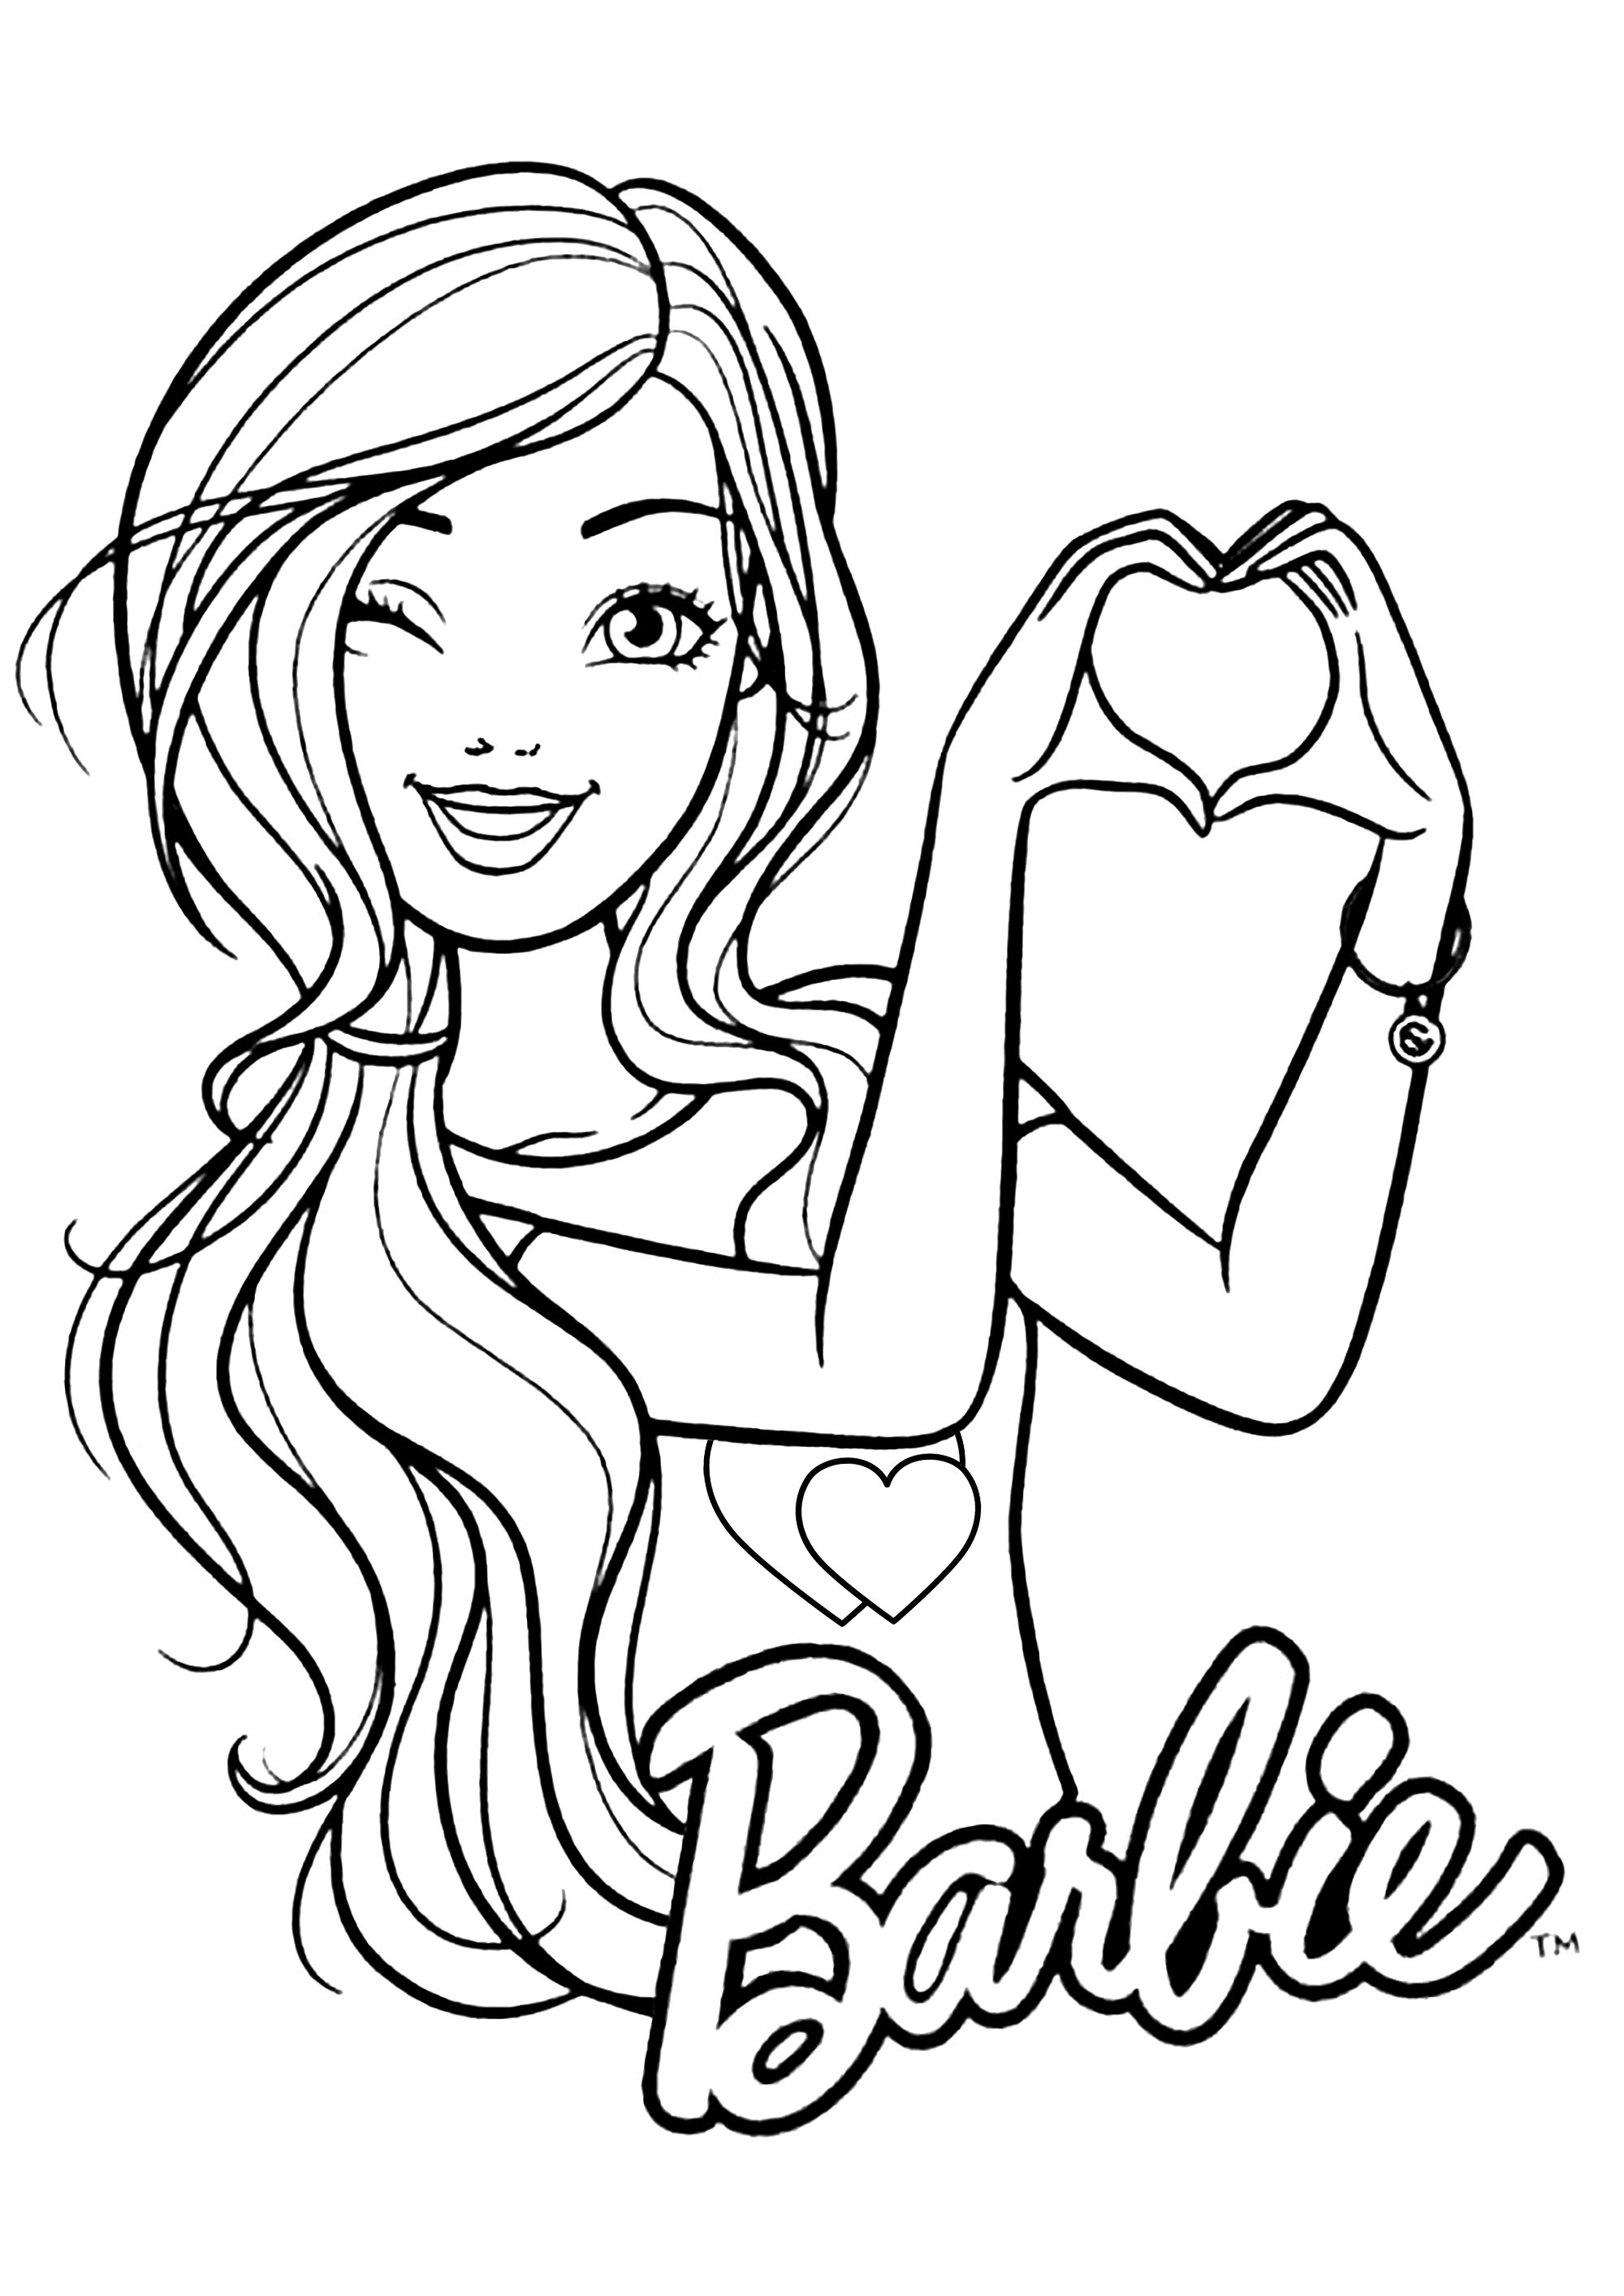 Funny Barbie coloring page